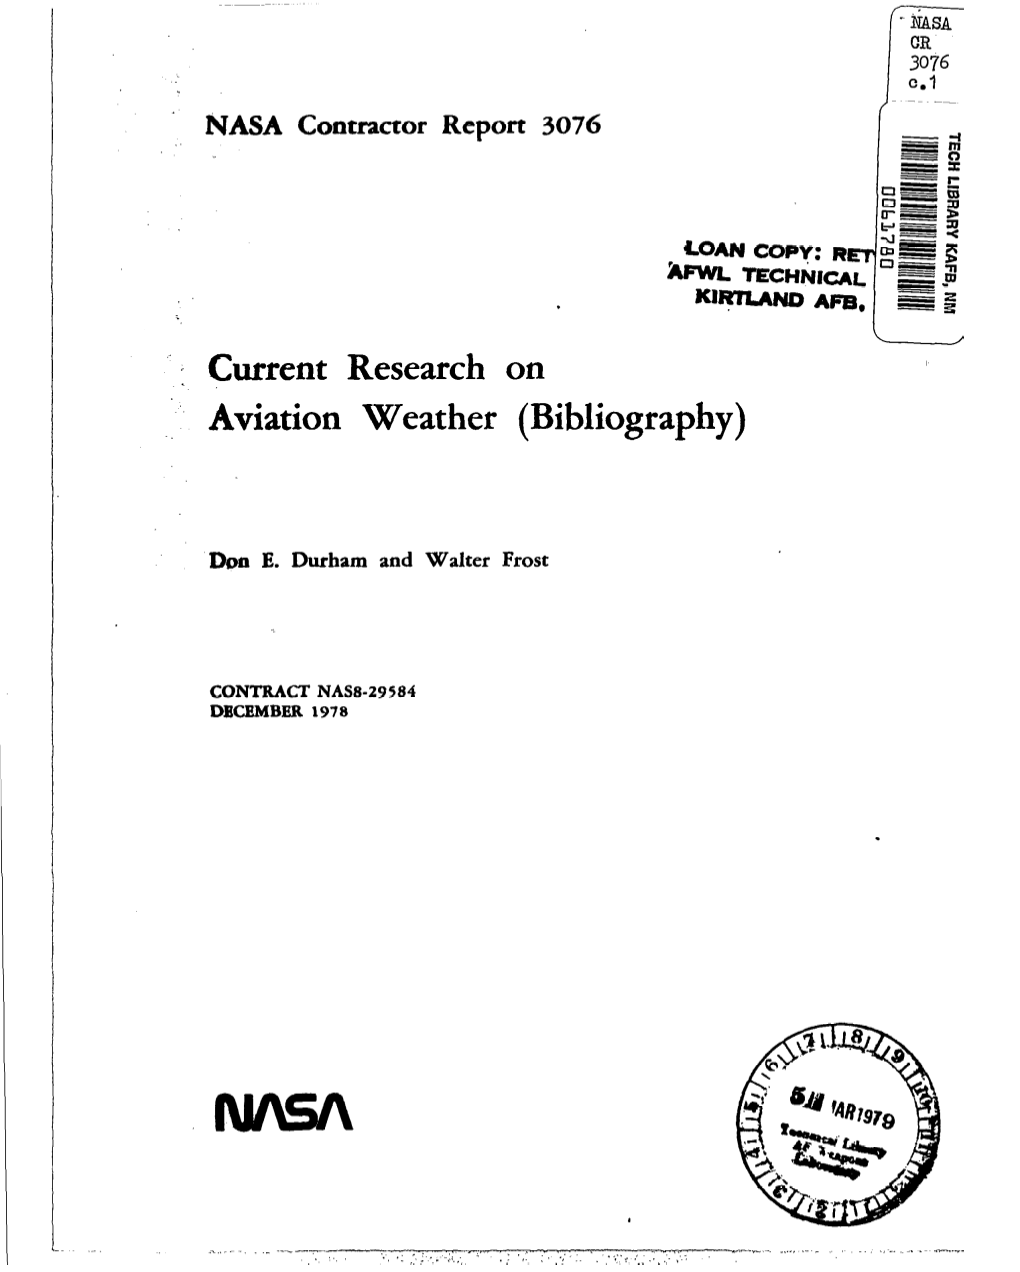 Current Research on Aviation Weather (Bibliography)